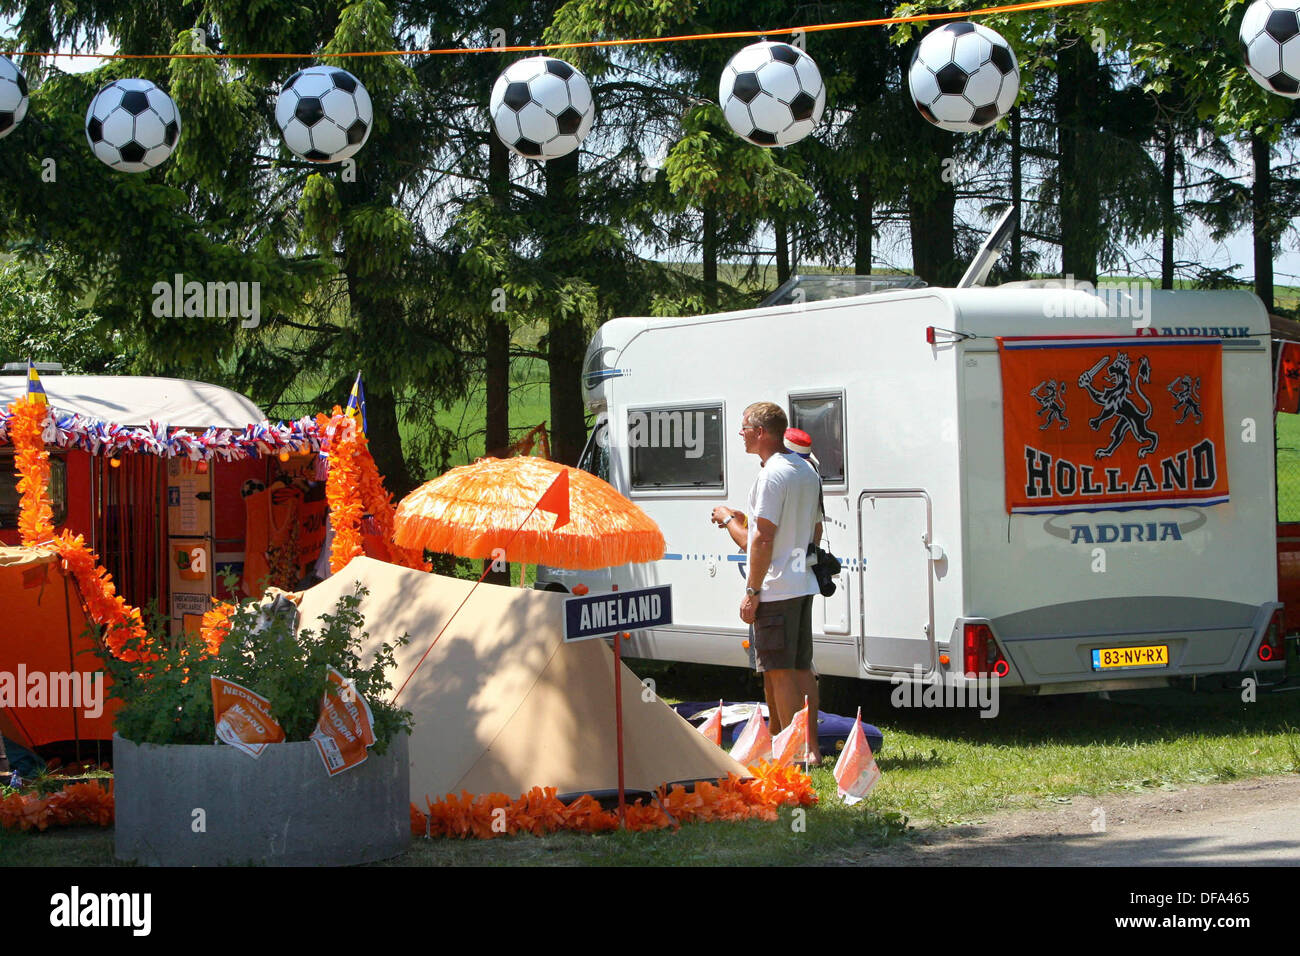 Two Dutch soccer fans stand in front of the camper at a camping ground. Up to 1,500 Dutch soccer fans accompany their team to Germany to watch the matches of the soccer world championship 2006. Stock Photo